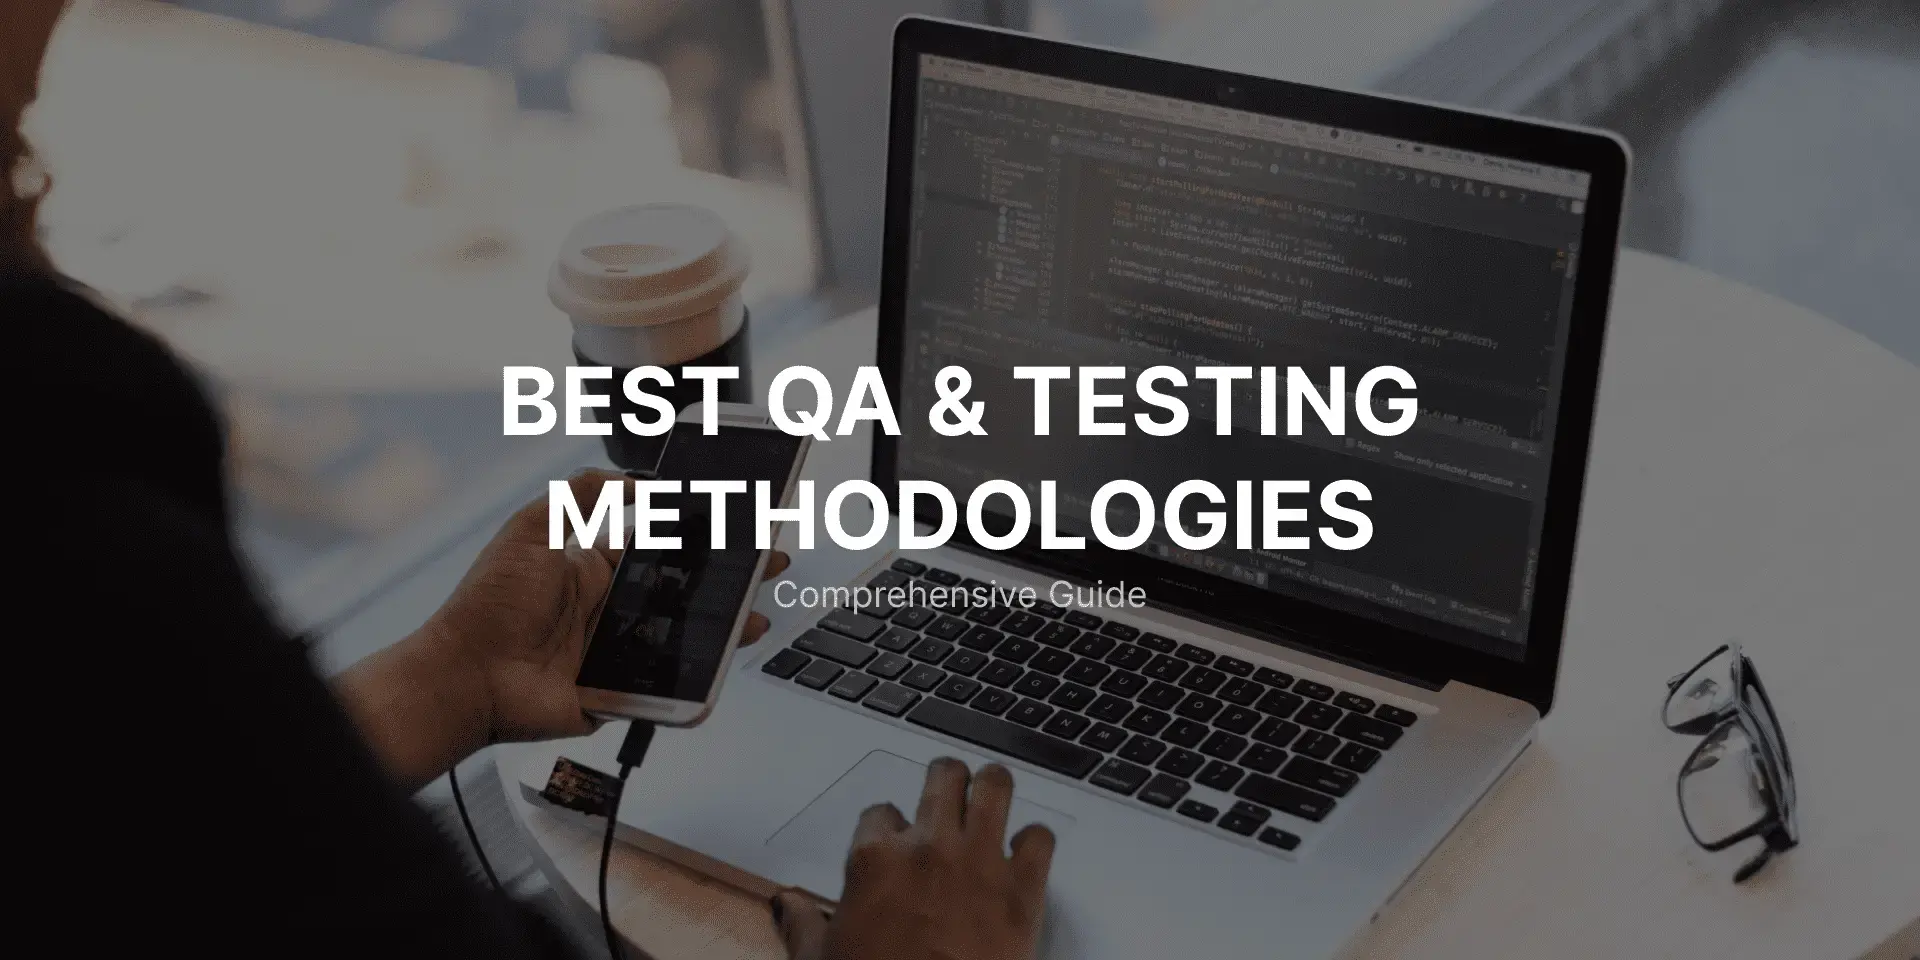 The Best QA and Testing Methodologies: Comprehensive Guide